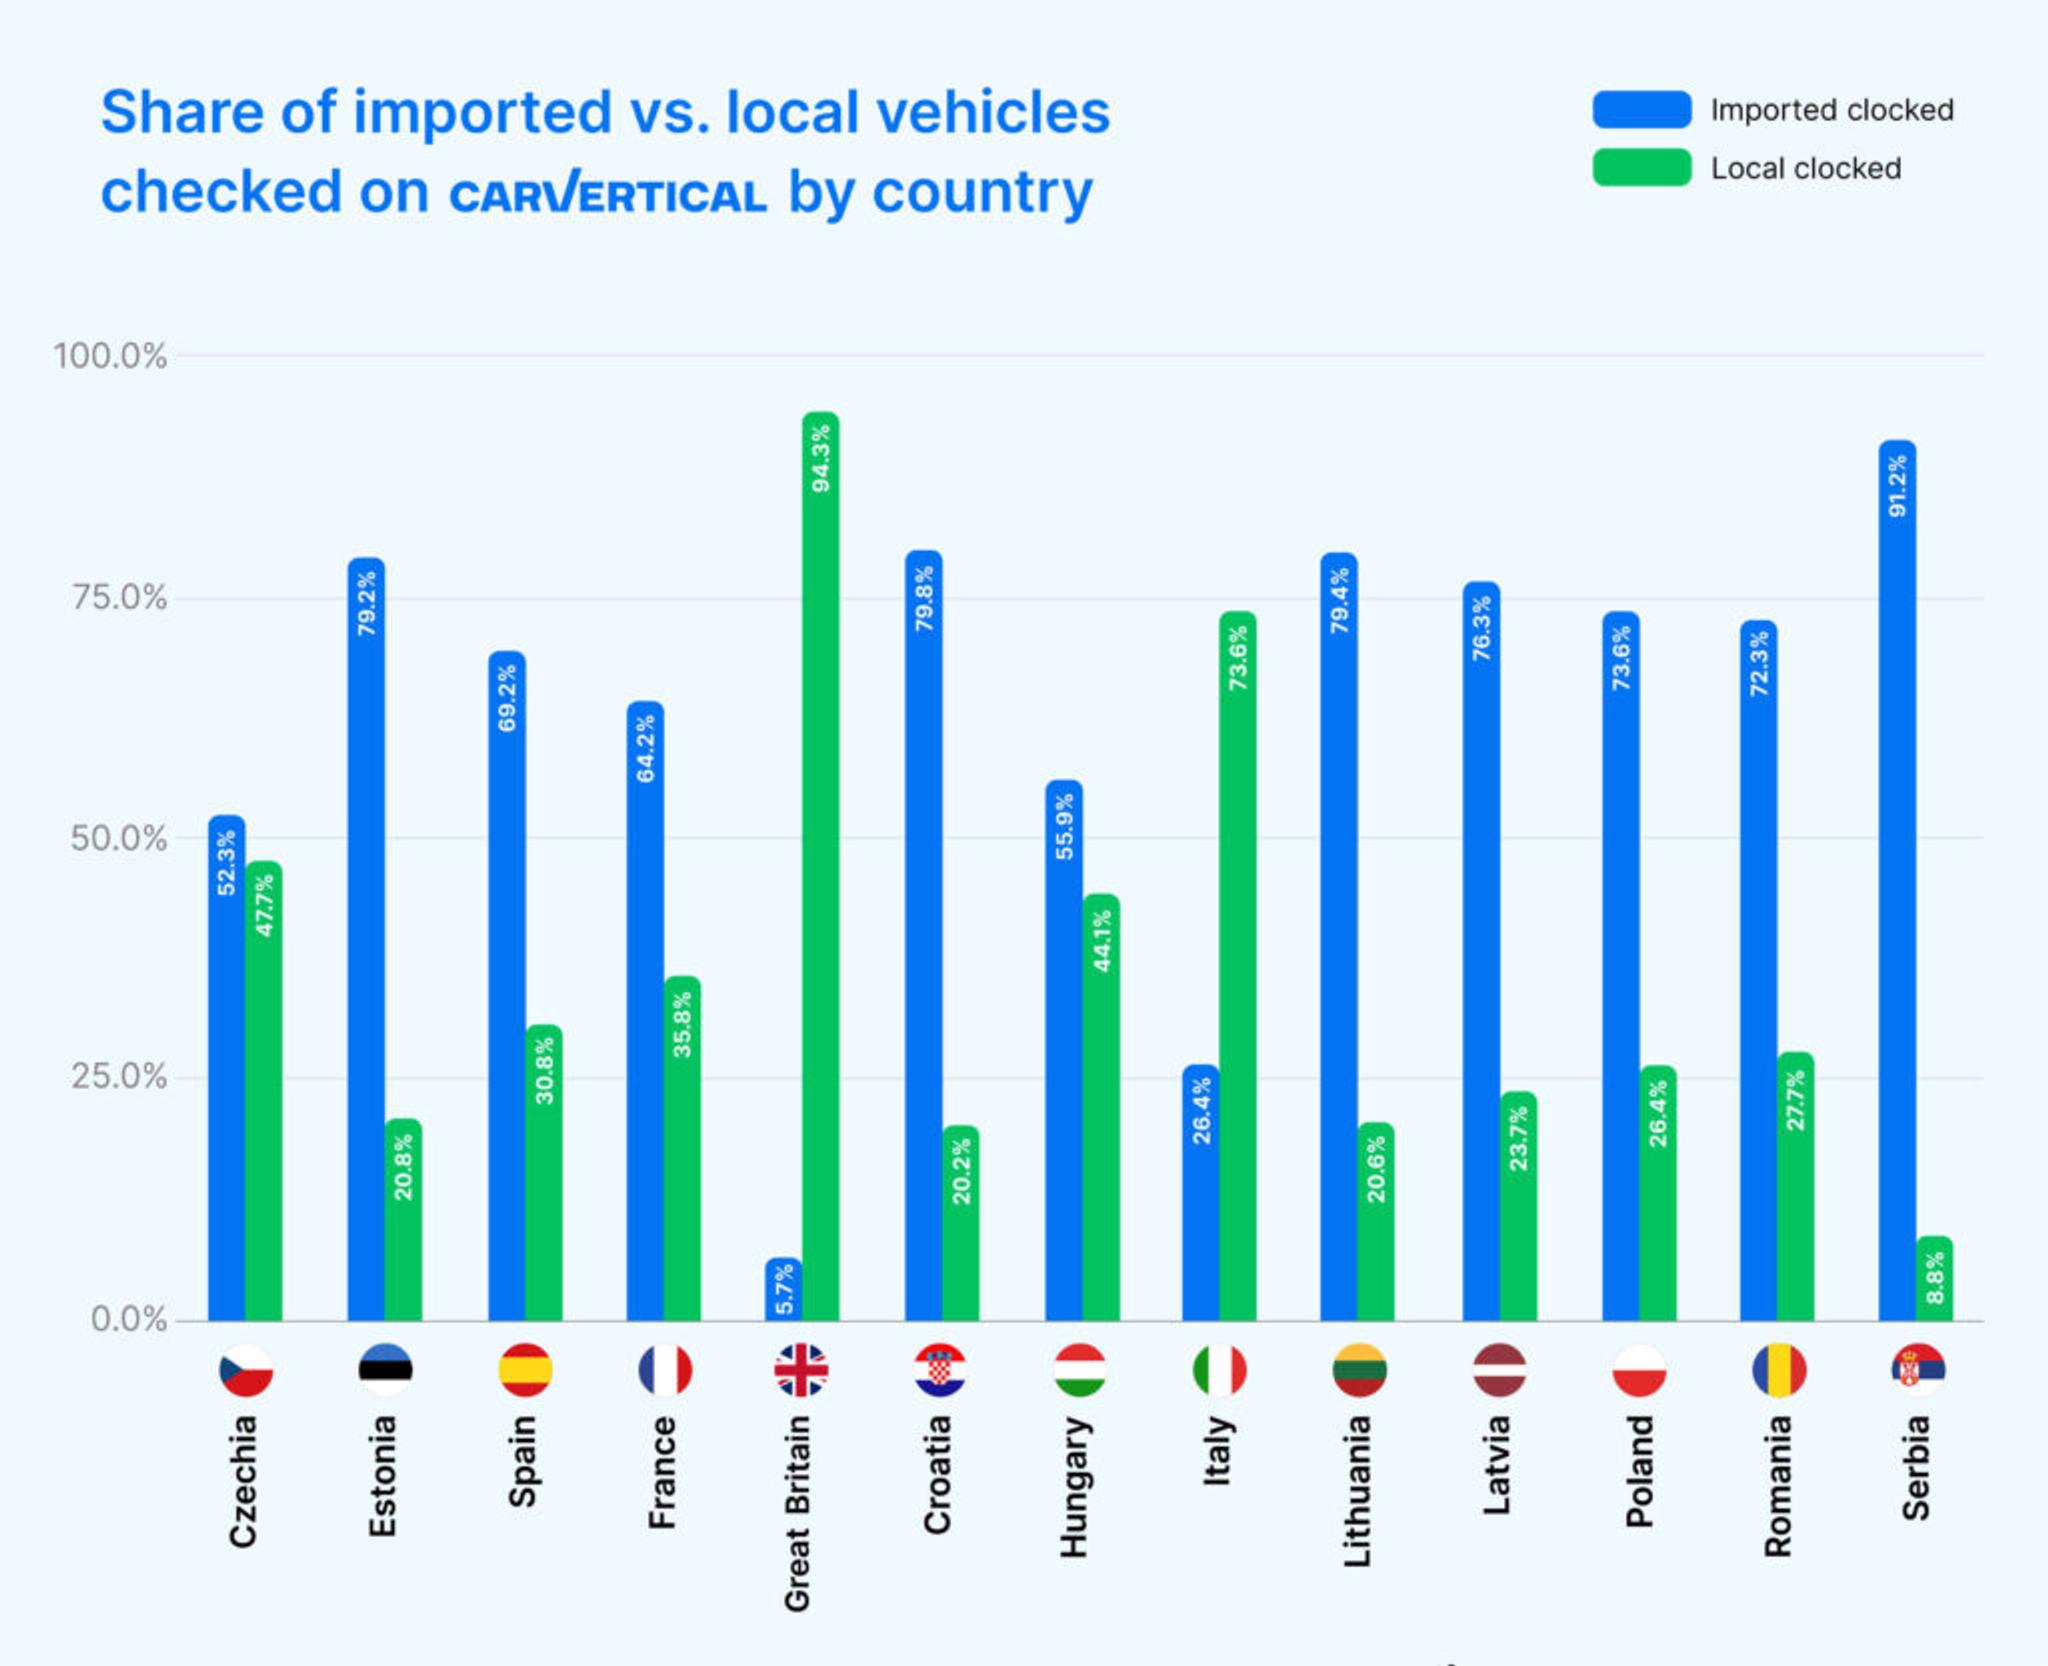 Share of imported vs. local vehicles in selected countries